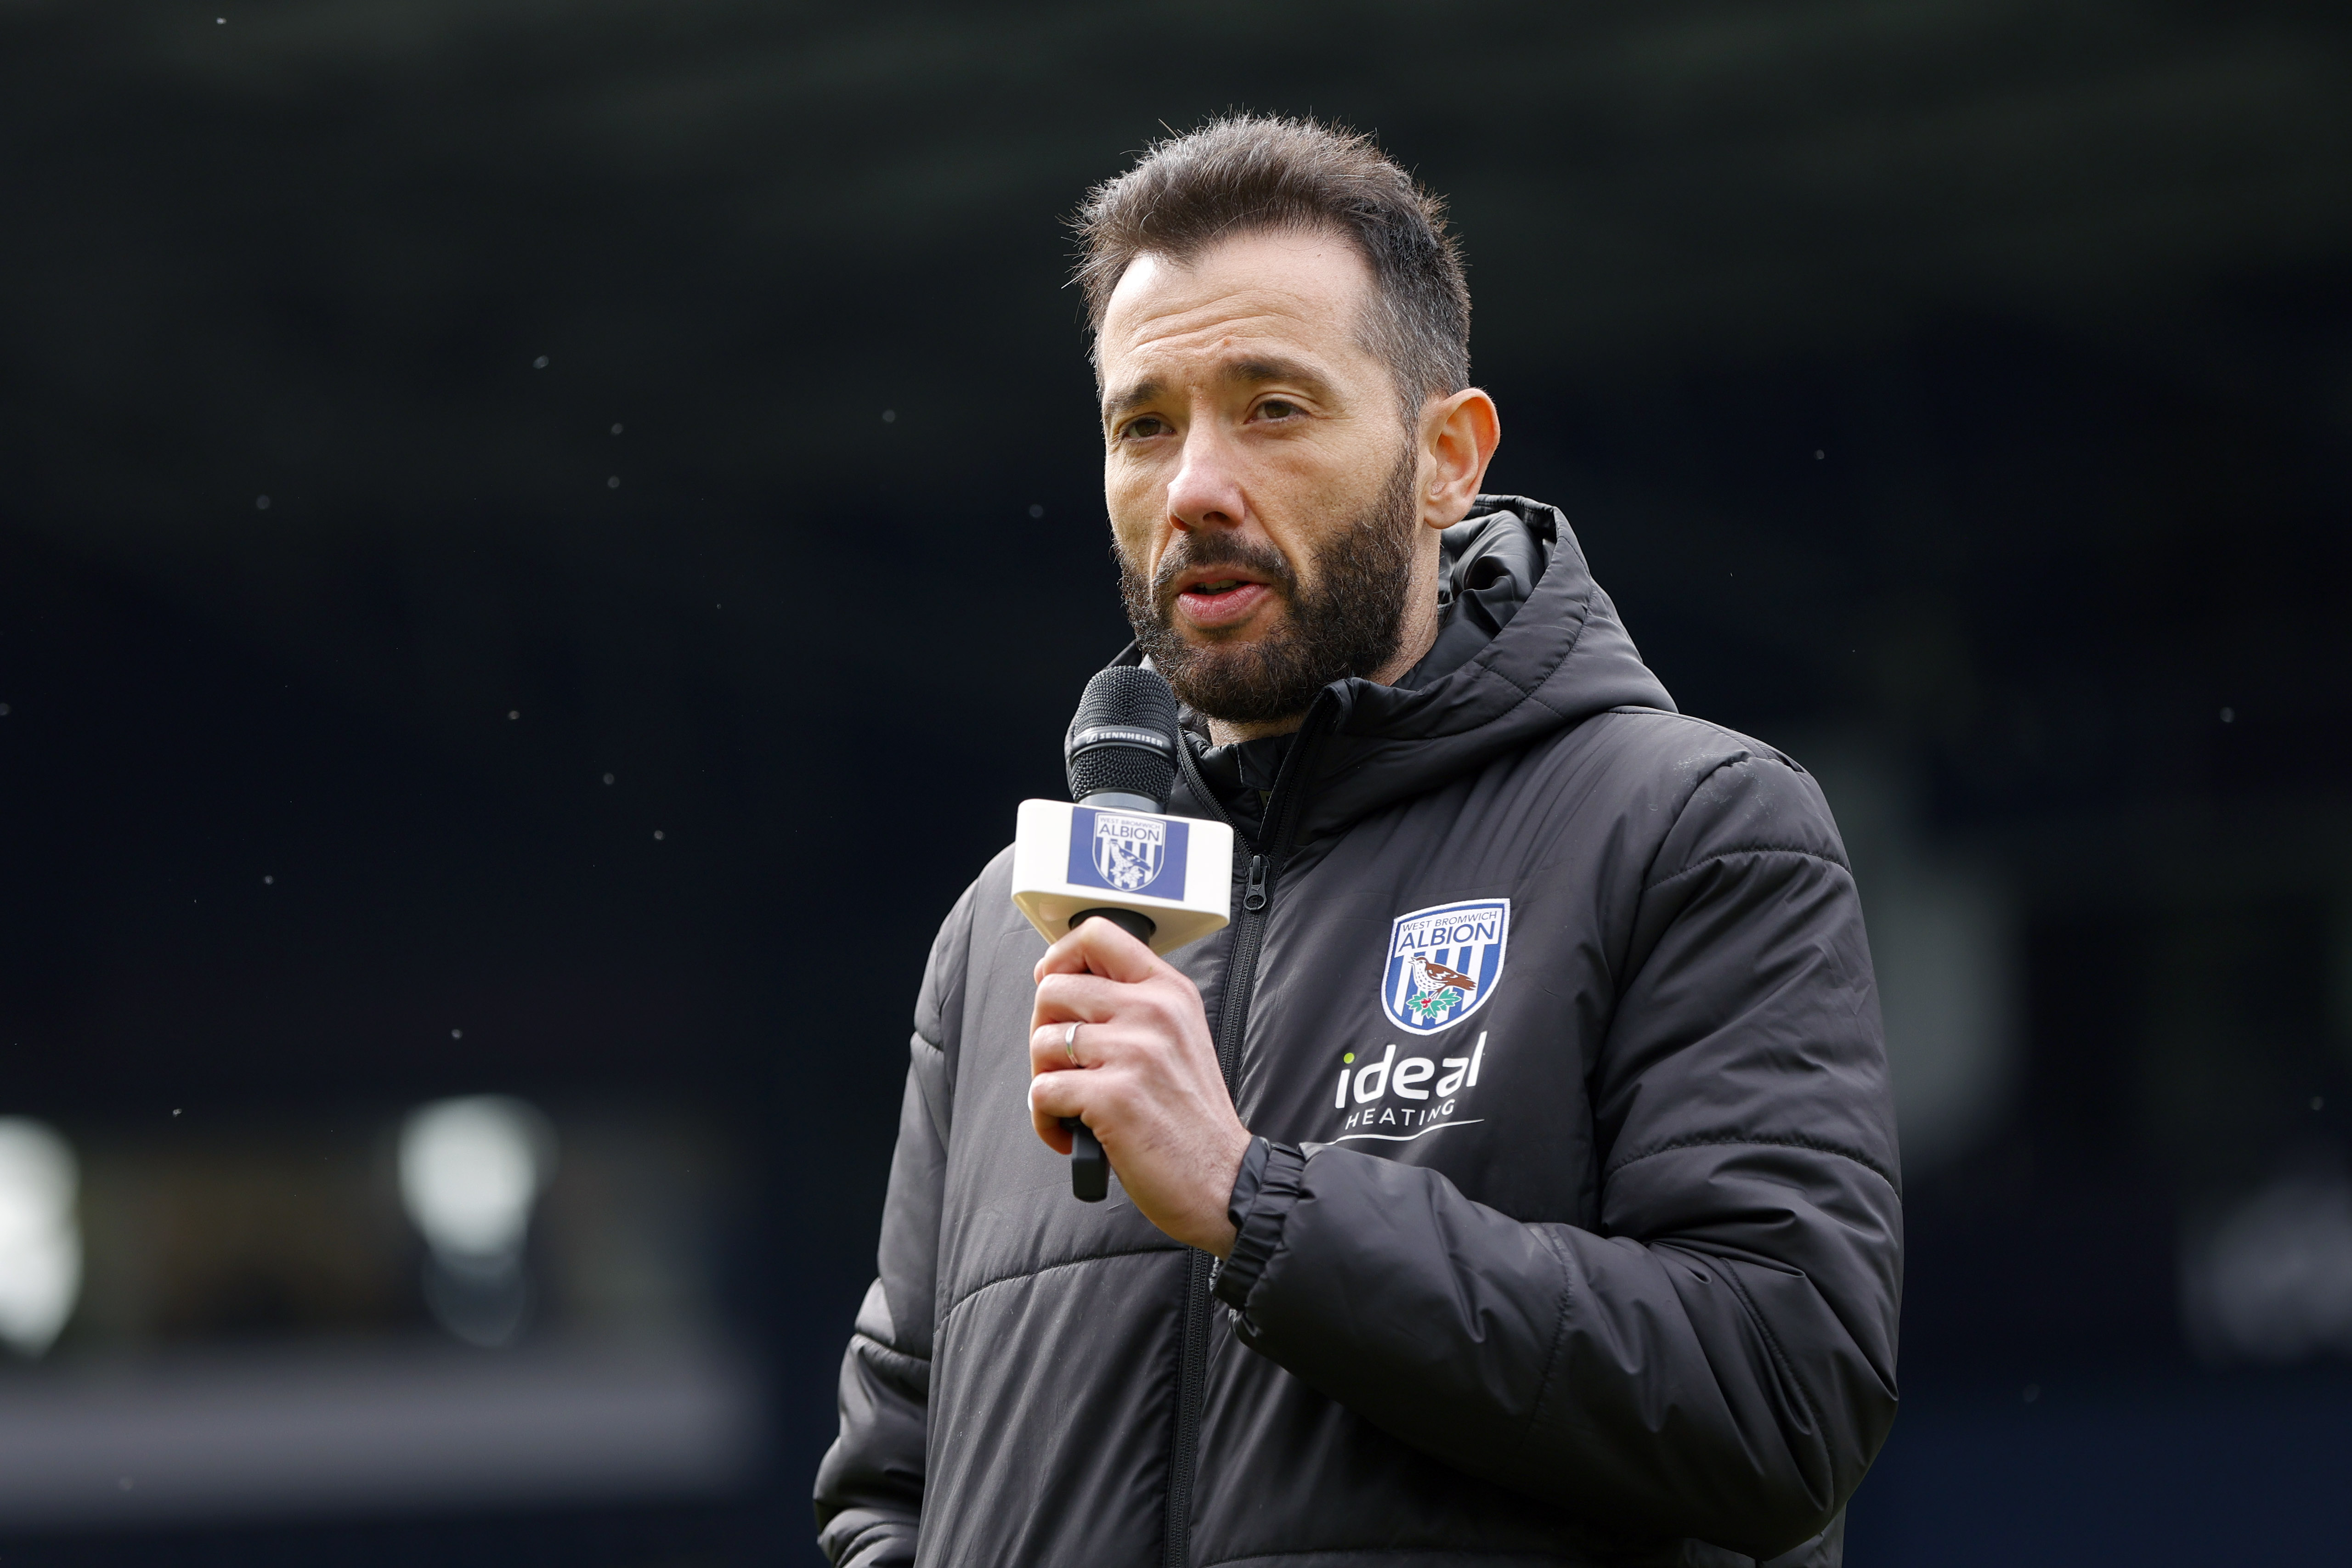 Carlos Corberán holding a mic talking to supporters at The Hawthorns